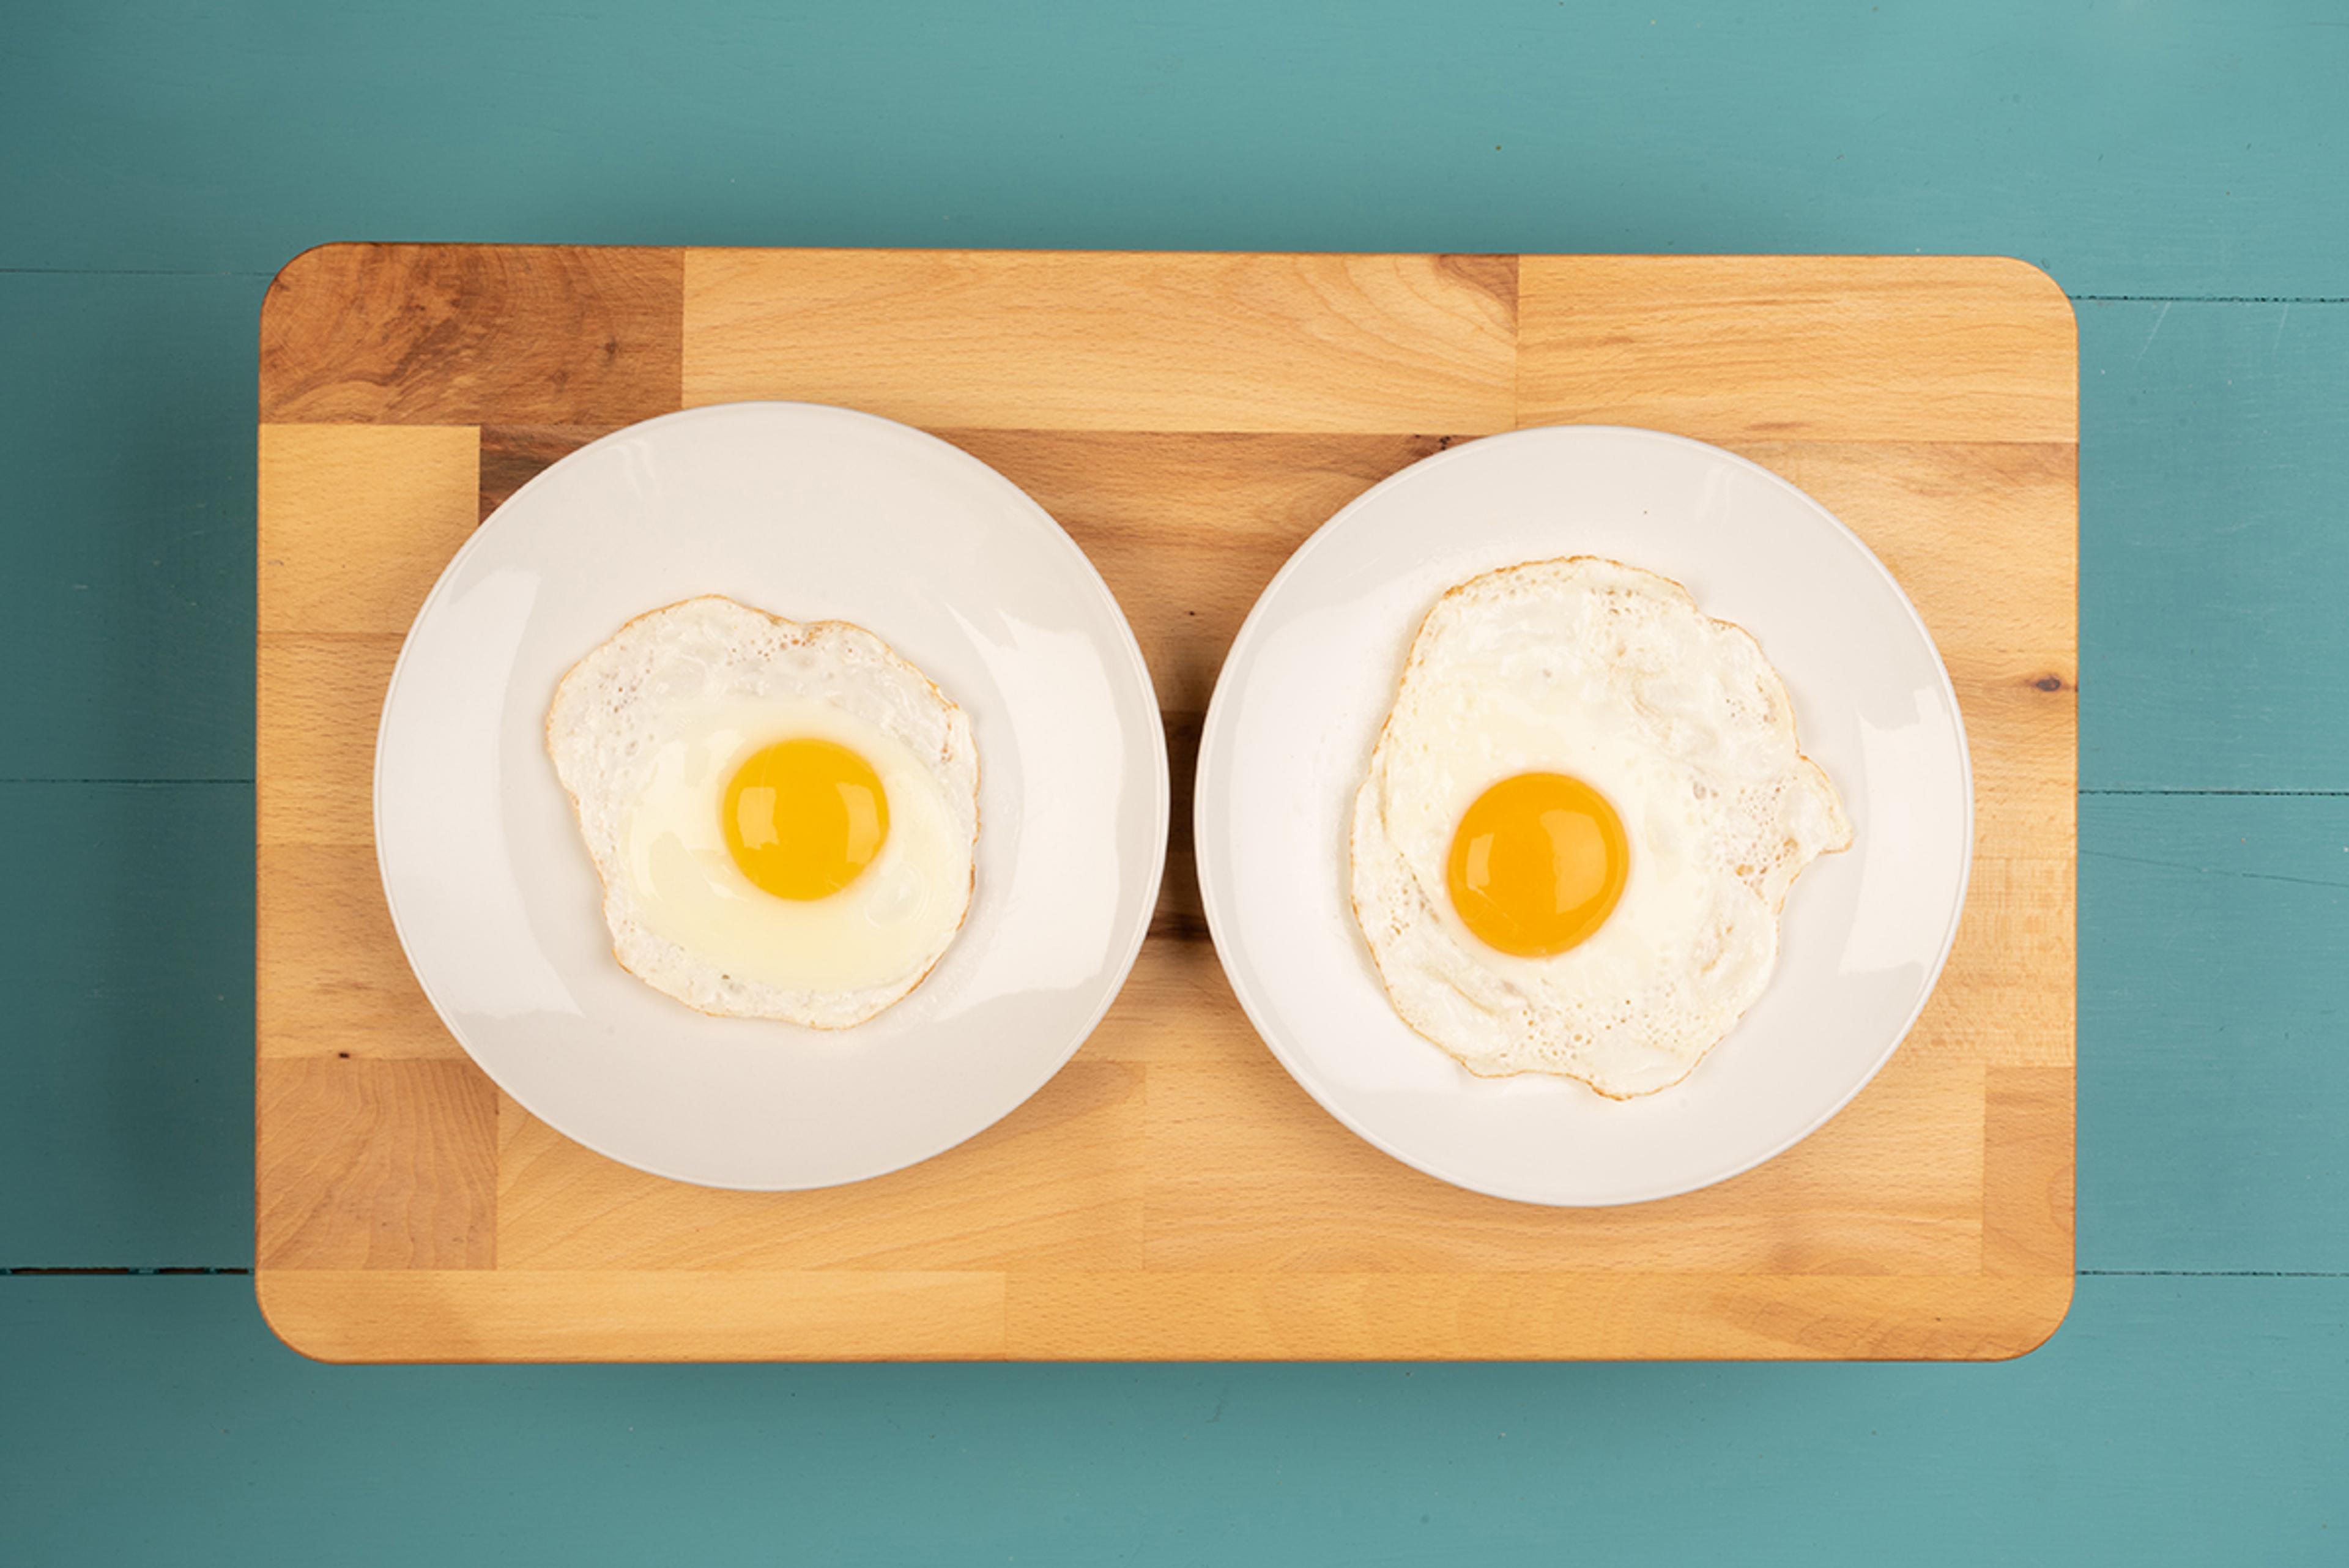 Two fried eggs on plates with different yolk colors.